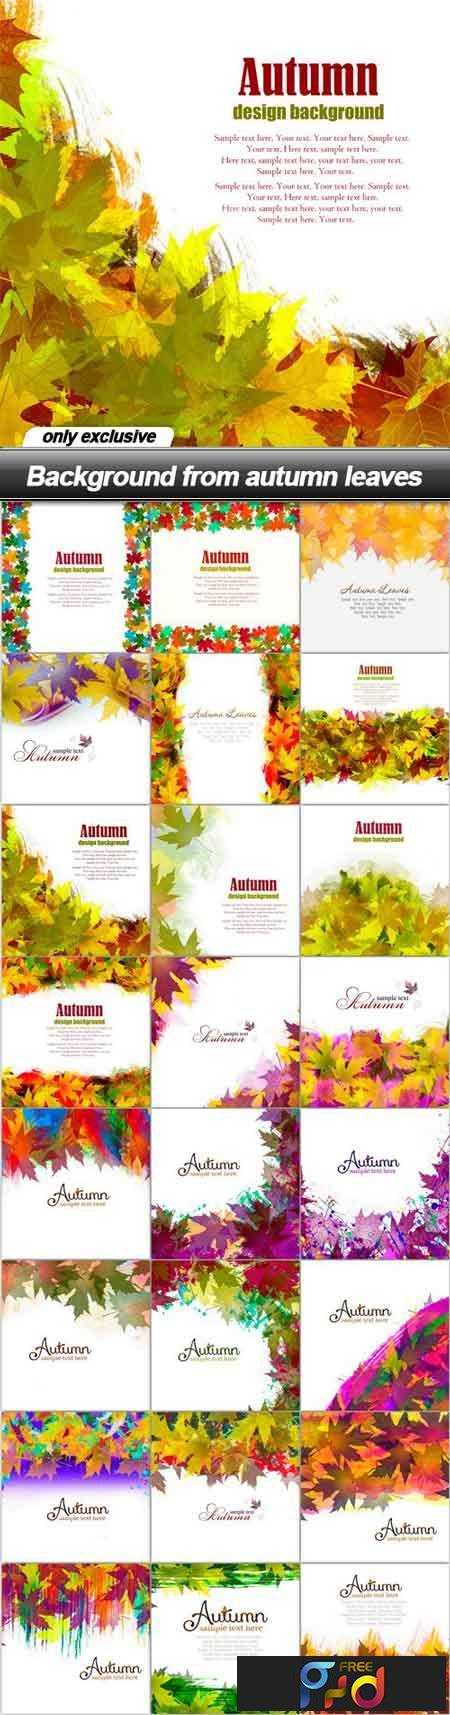 freepsdvn-com_1475697215_background-from-autumn-leaves-24-uhq-jpeg-cover